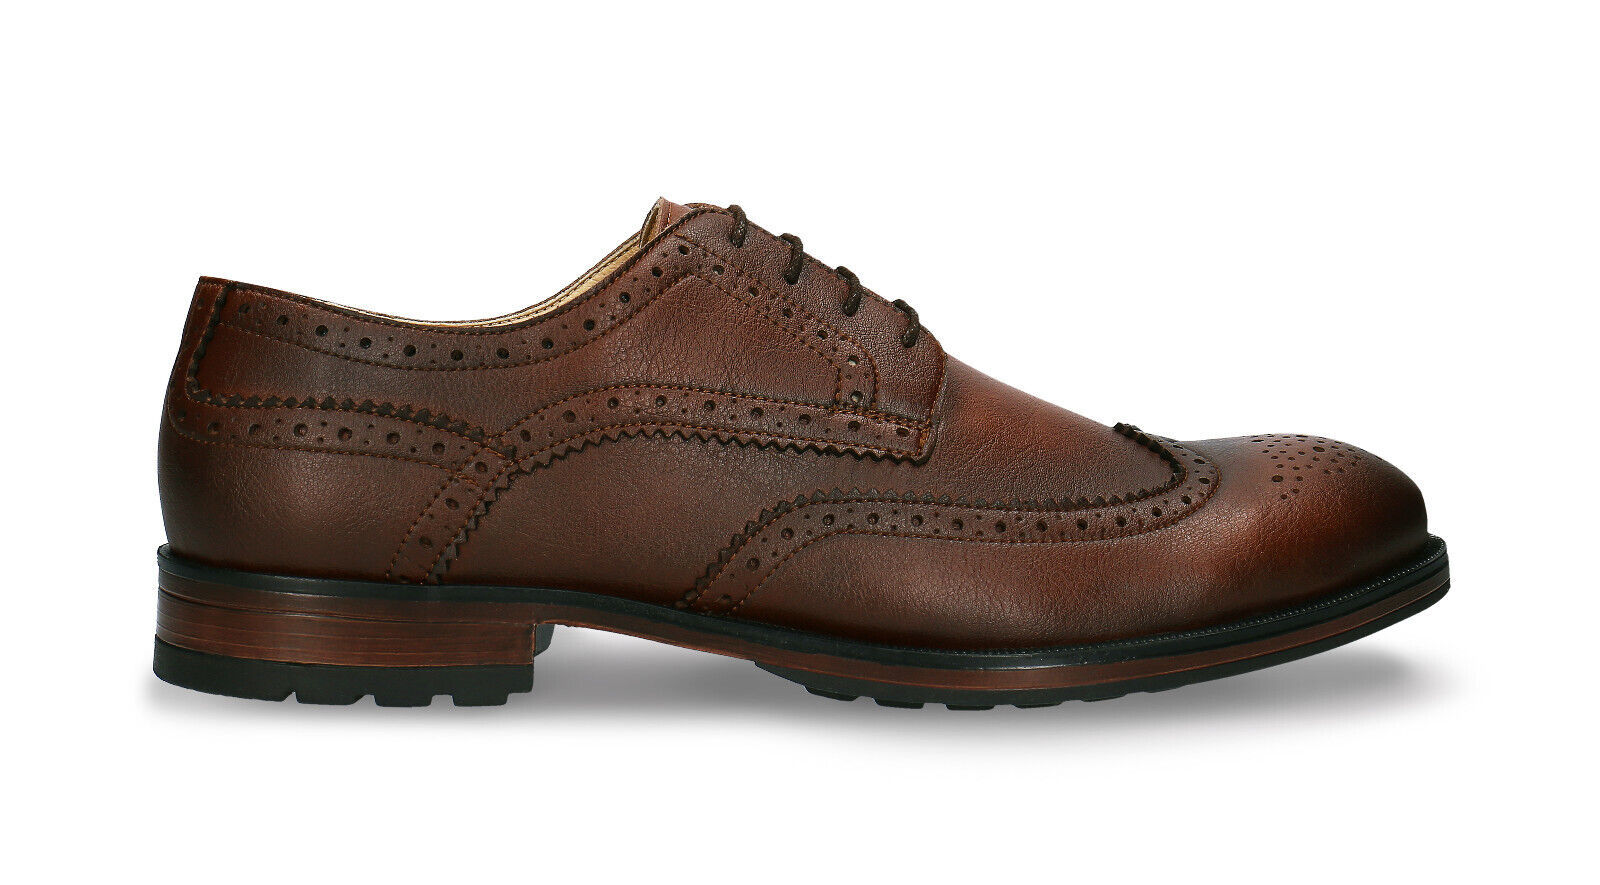 Primary image for Brogue shoes men dress brown wing tip classic on vegan leather breathable lined